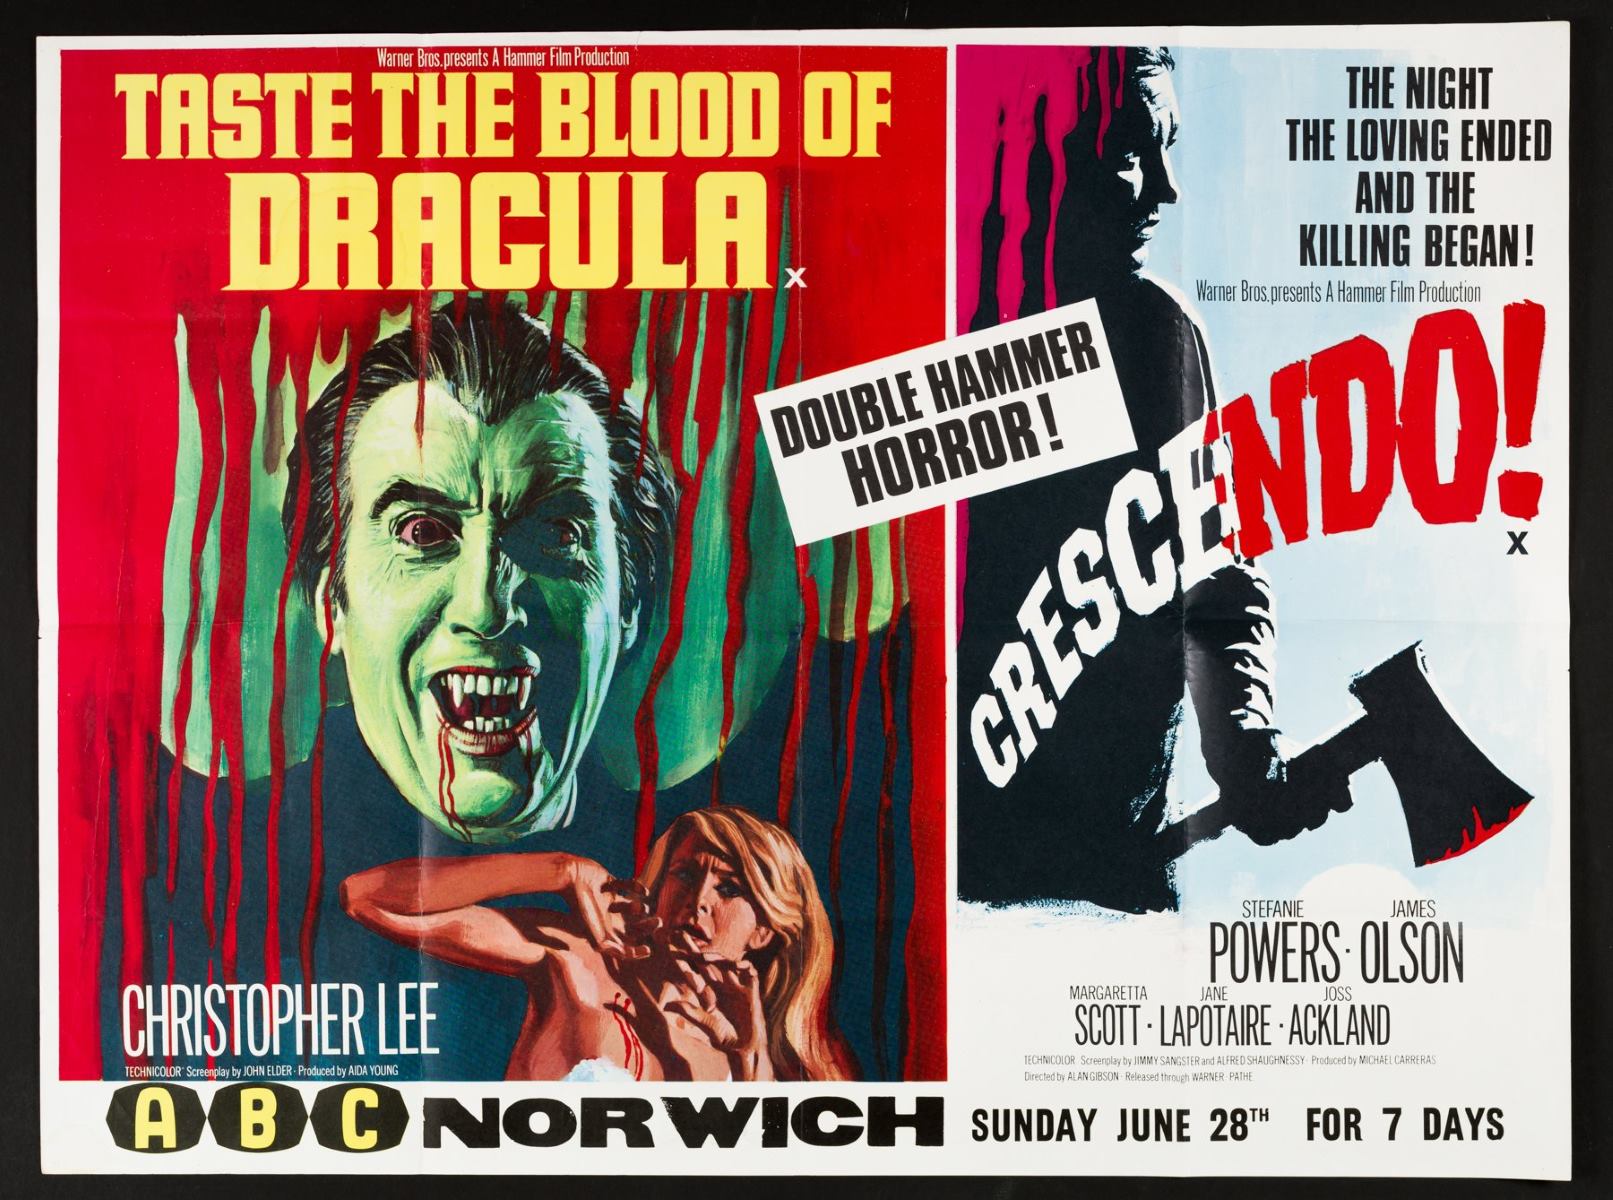 46-facts-about-the-movie-taste-the-blood-of-dracula